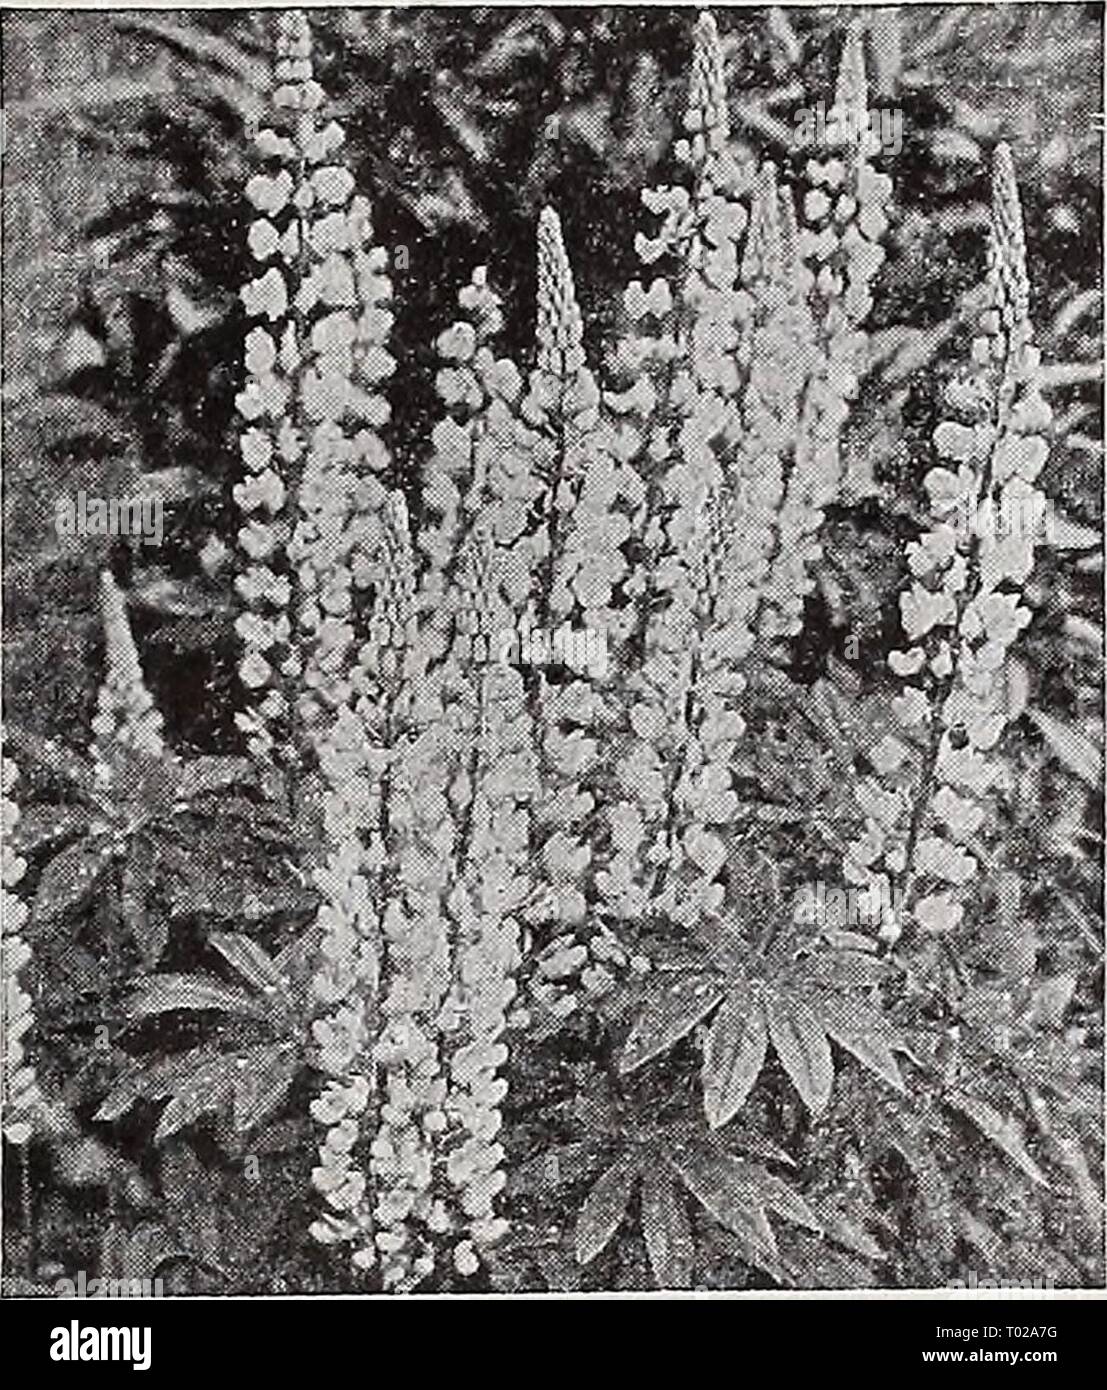 Dreer's garden book 1939 : 101 years of Dreer quality seeds plants bulbs . dreersgardenbook1939henr Year: 1939  Liatris scariosa, September Glory Liatris Blazing Star, Gay Feather Scariosa alba. 3 feet. Graceful tall spikes with white fuzzy flowers during August and September. 50c each; 3 for $1.40; 12 for $5.00. September Glory. 3 to 4 feet. A glorious variety with tall graceful spikes thickly studded with stunning lavender- purple blooms. Late August-Sep- tember. 50c each; 3 for $1.40; 12 for $5.00. Lobelia cardinalis ® Cardinalis {Cardinal Flower). 2 feet. Massive spikes set with glossy ca Stock Photo